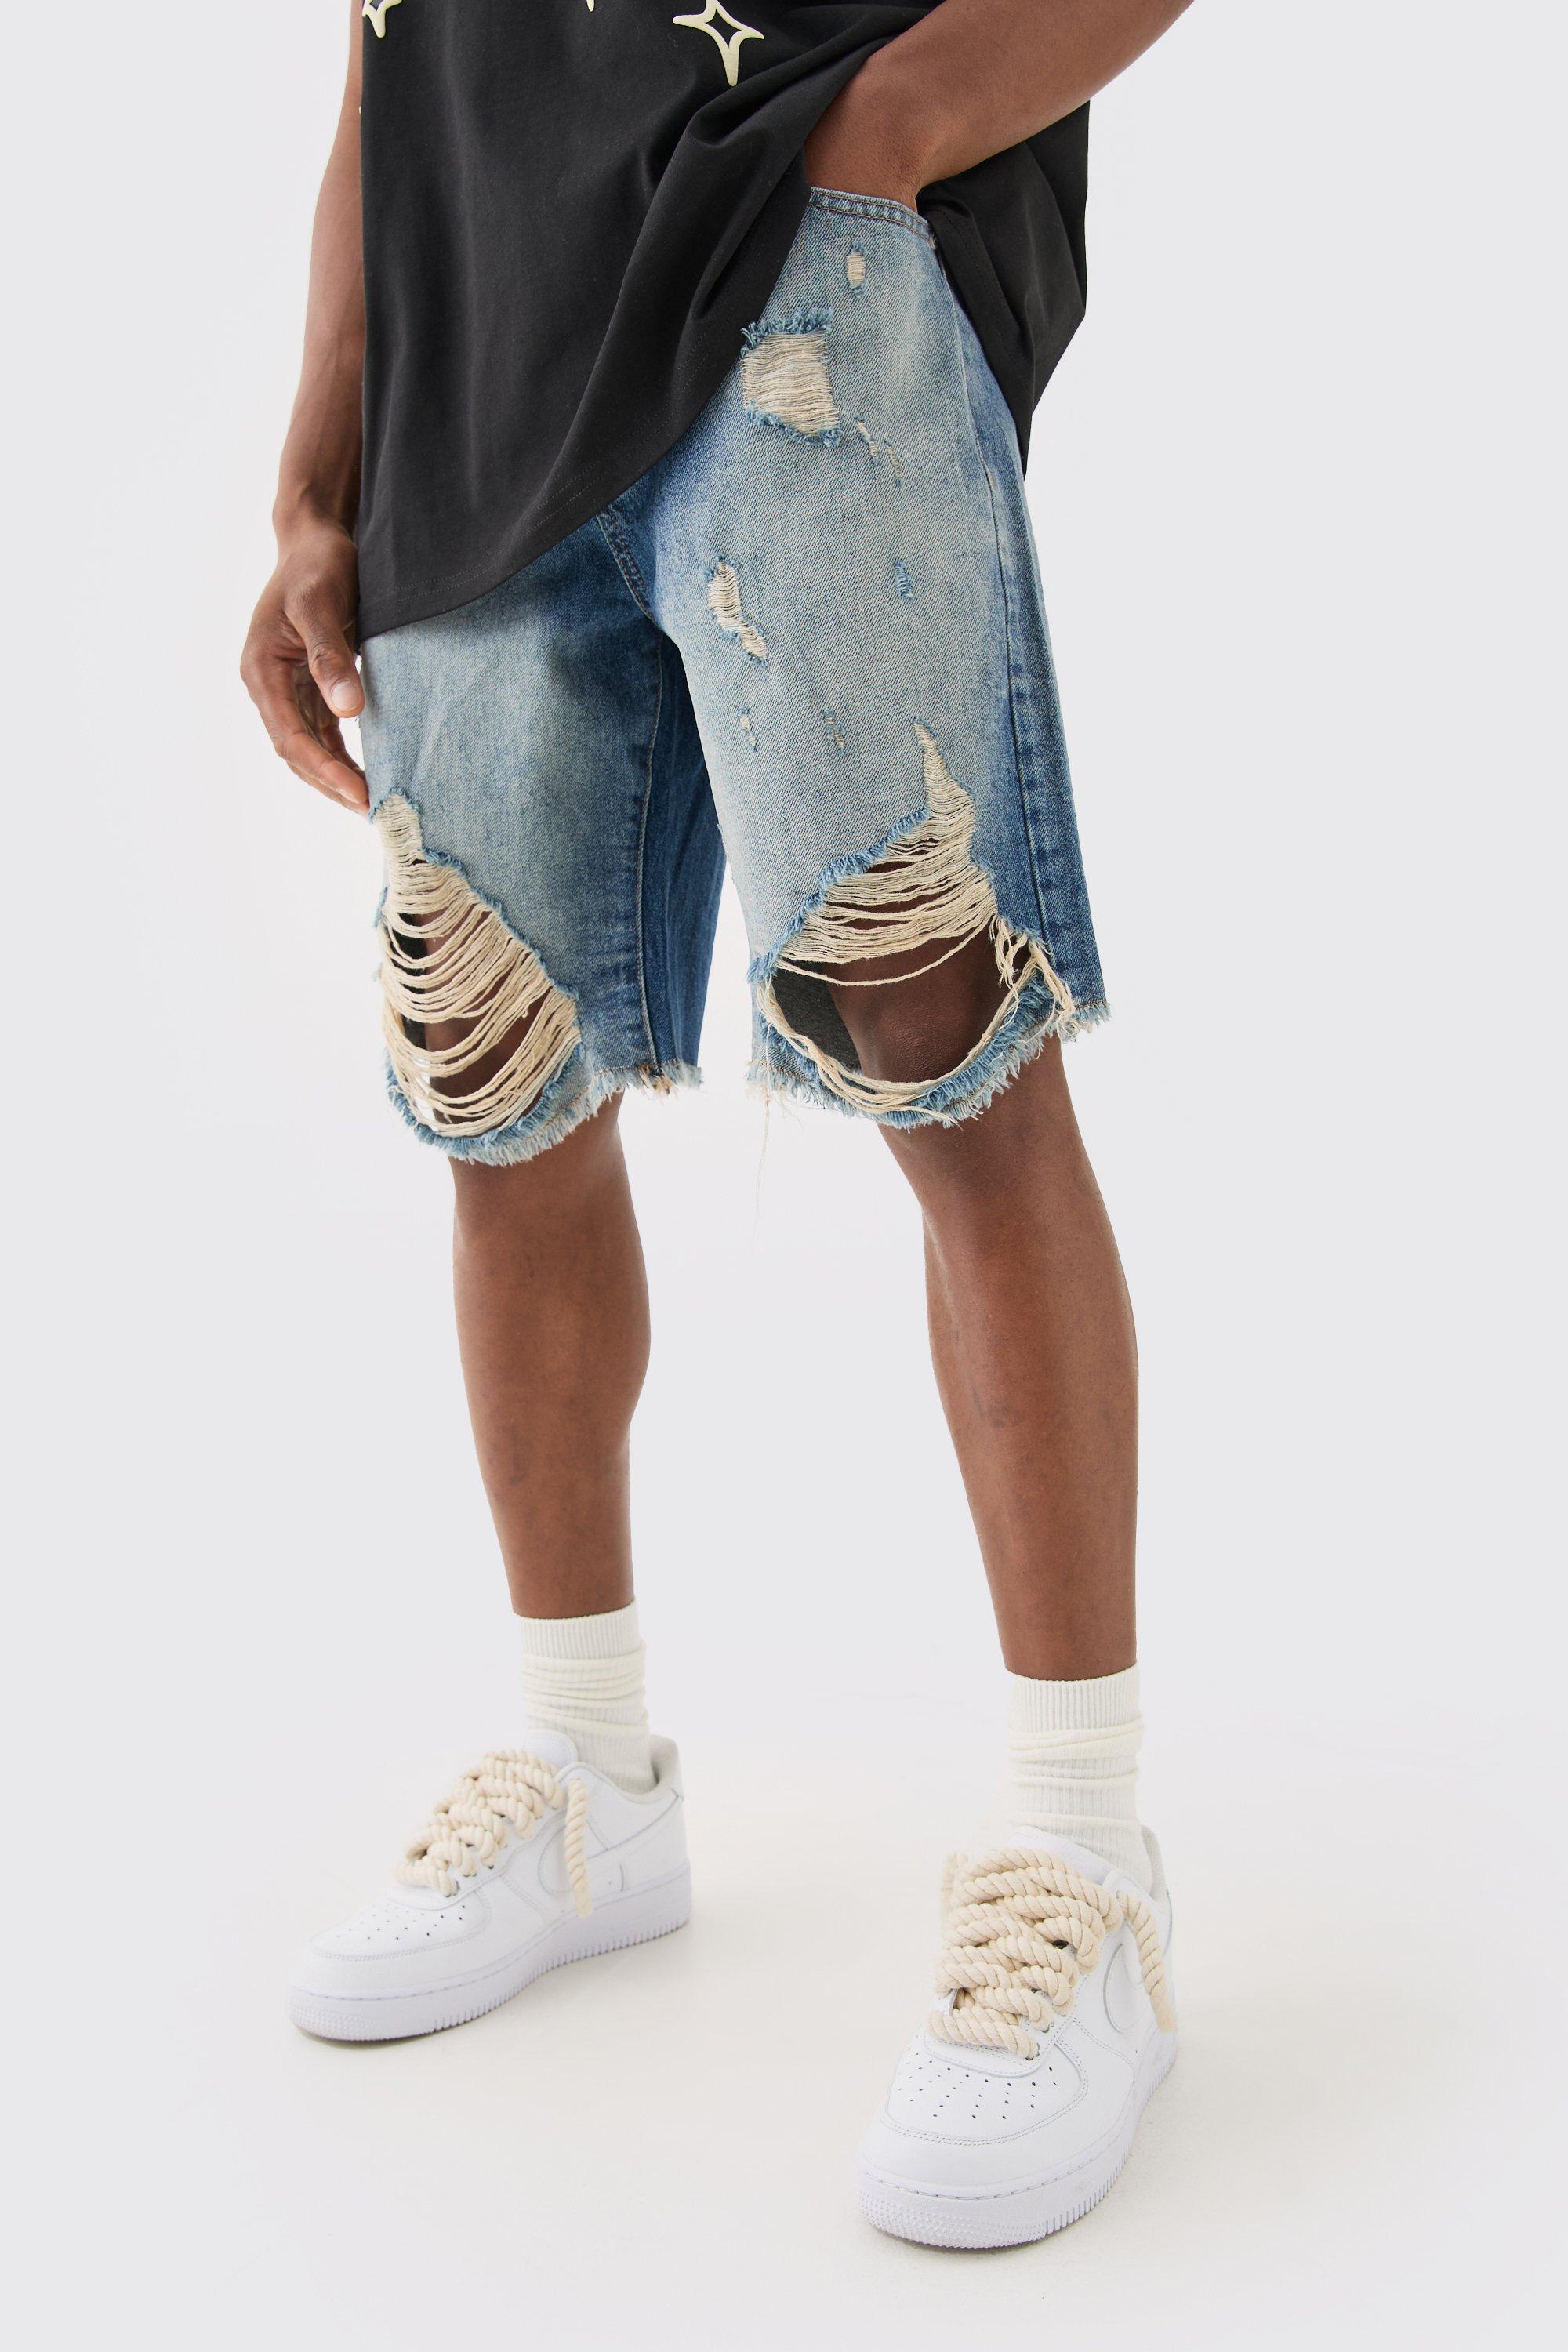 Image of Relaxed Rigid Long Length Ripped Denim Shorts In Ice Blue, Azzurro